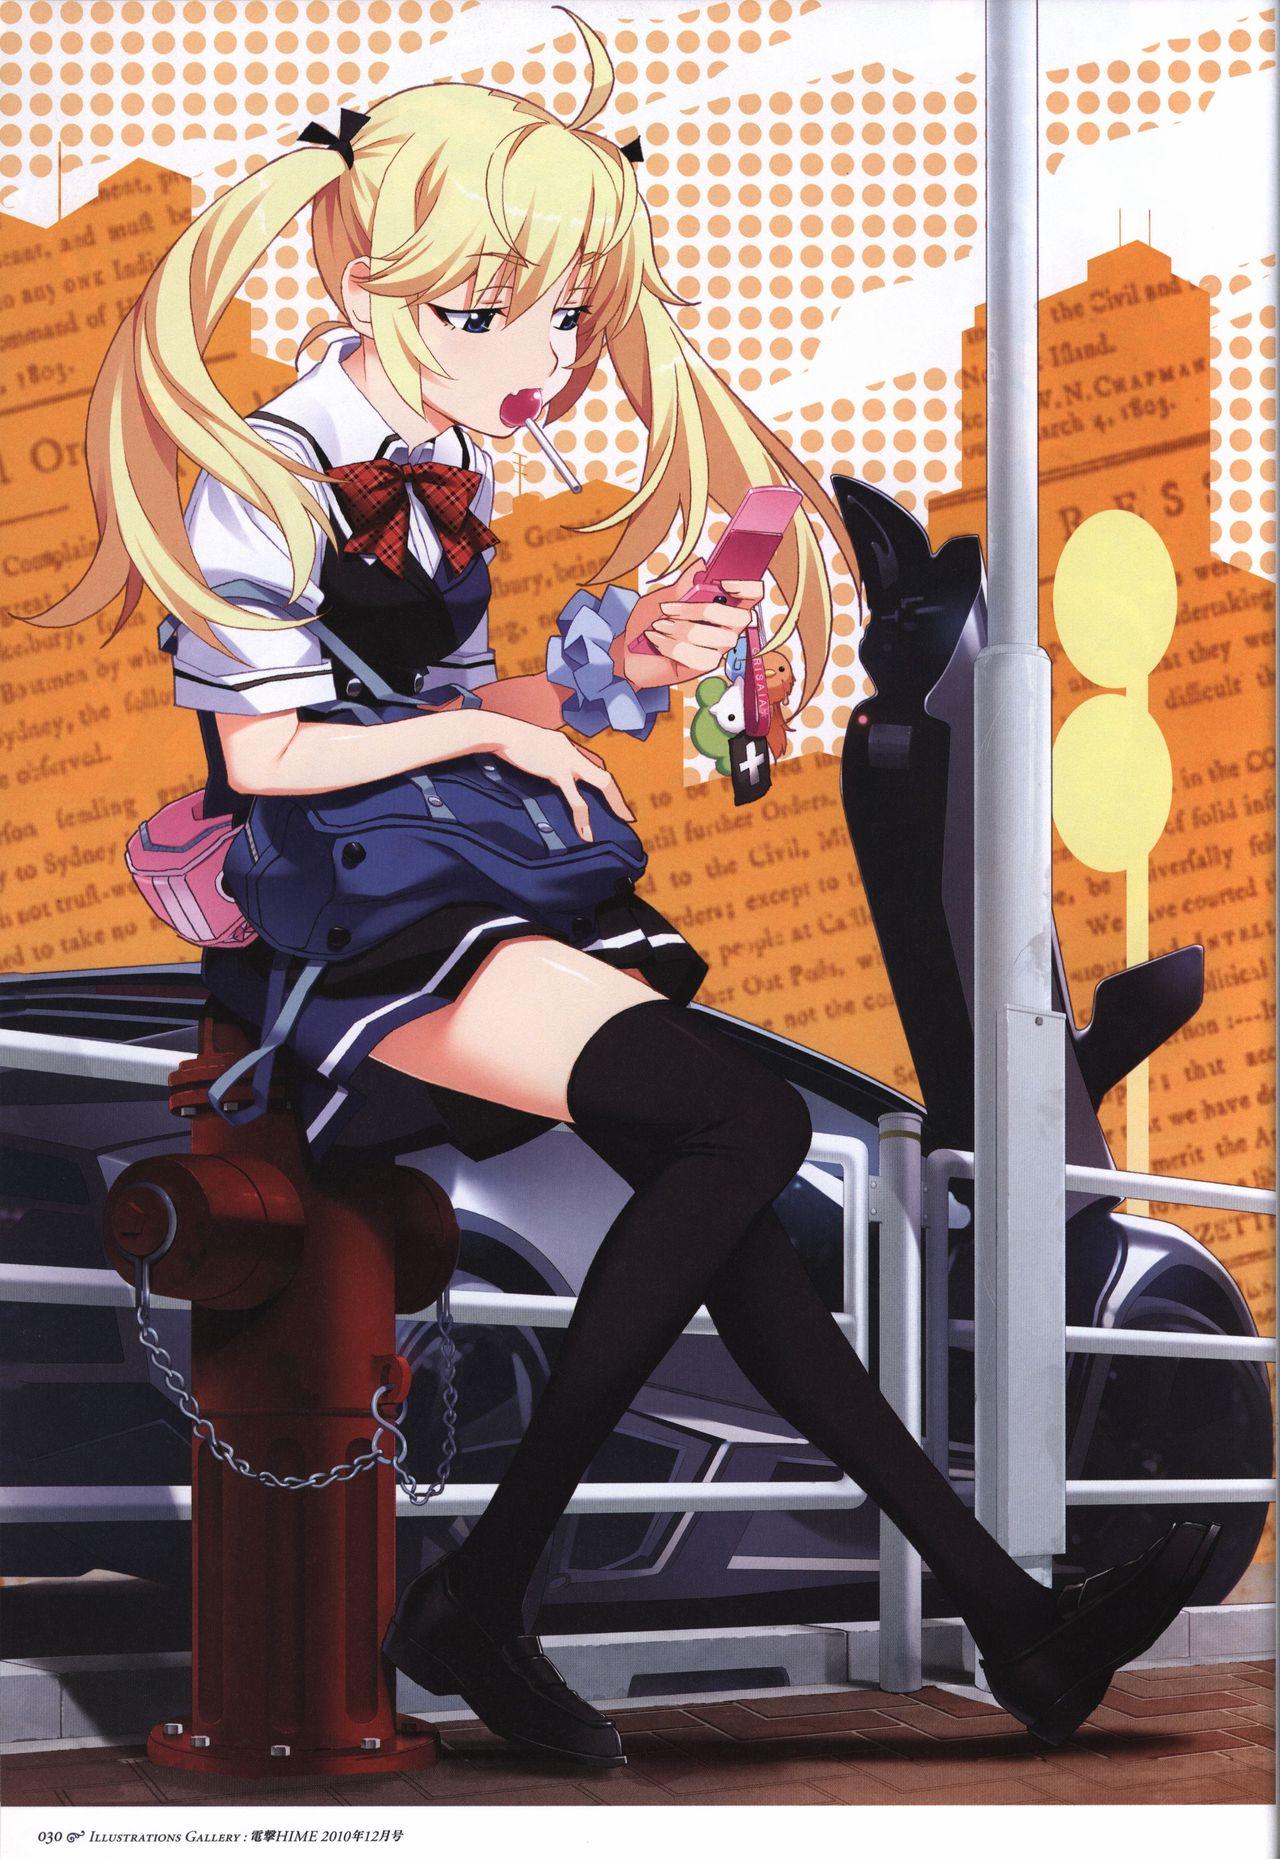 The Fruit of Grisaia Visual FanBook 30